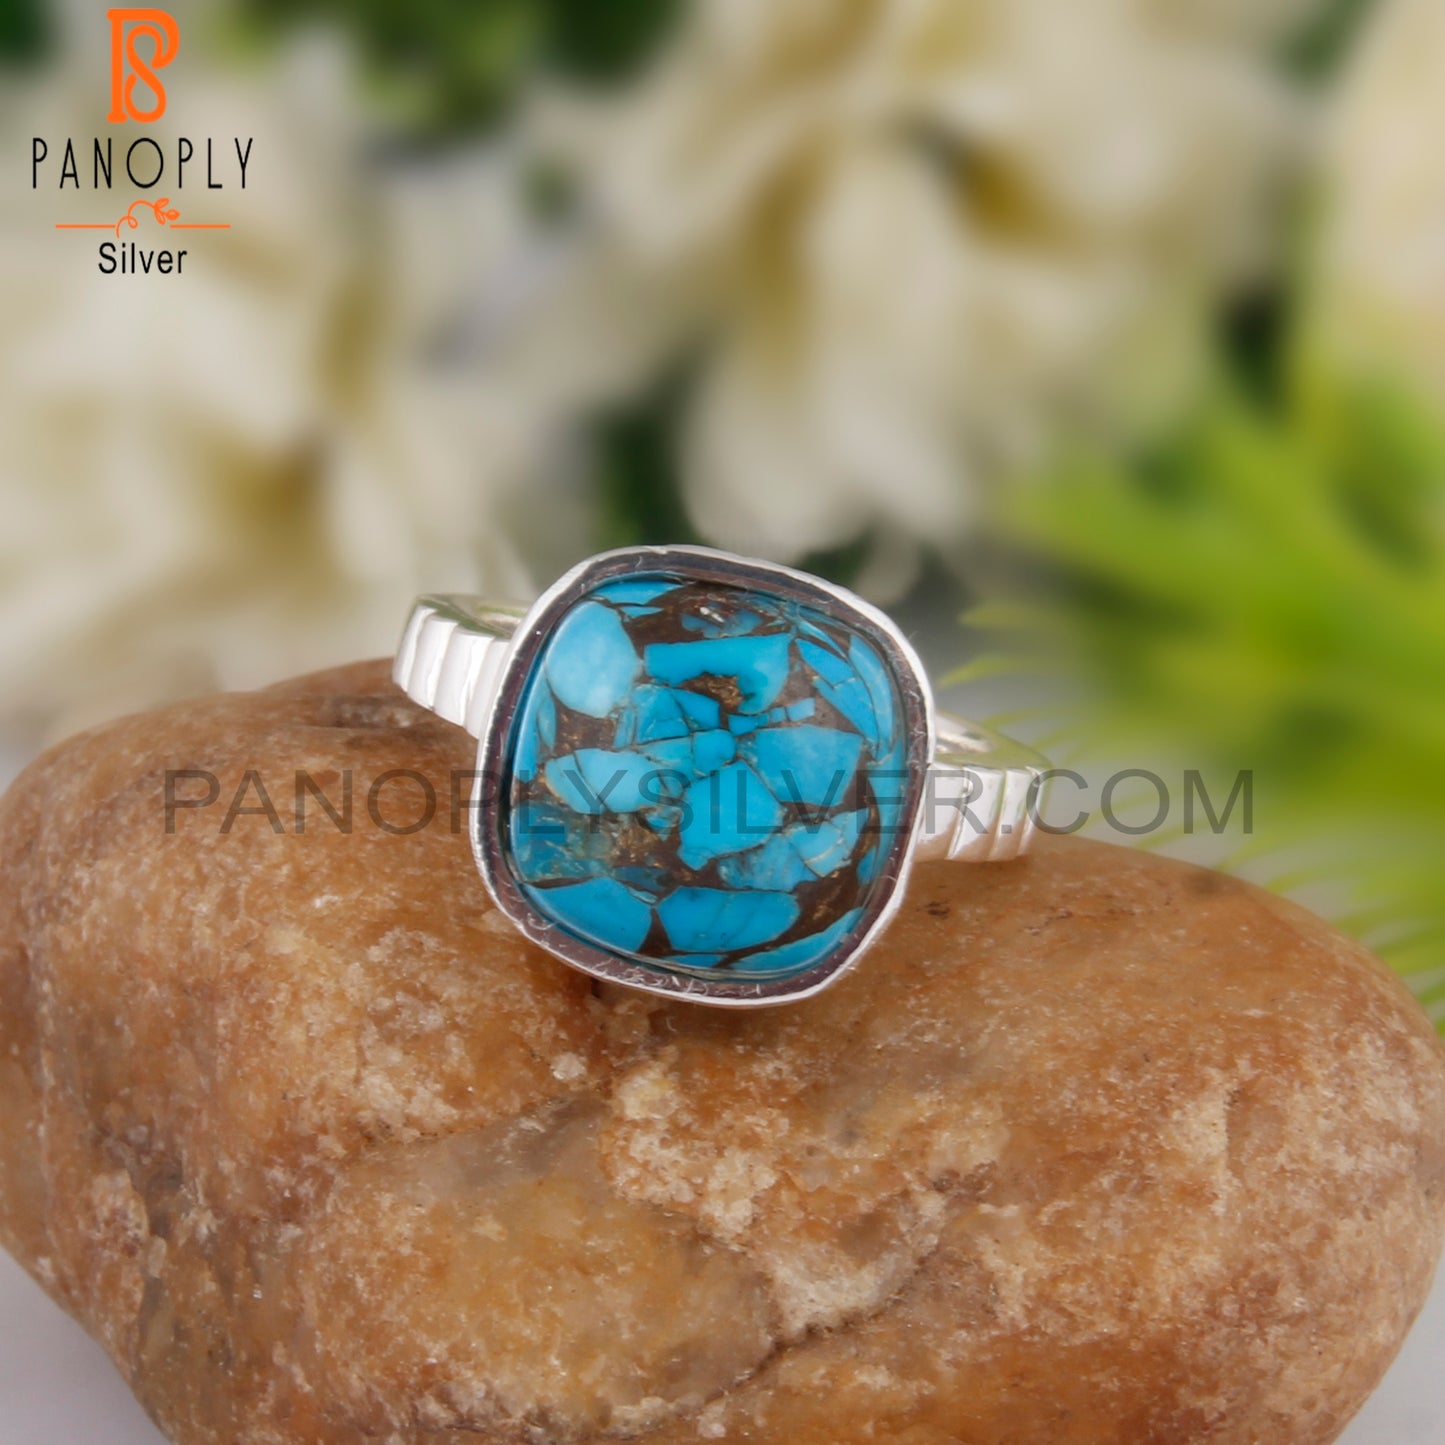 Mojave Copper Turquoise Cushion Handmade 925 Silver Ring